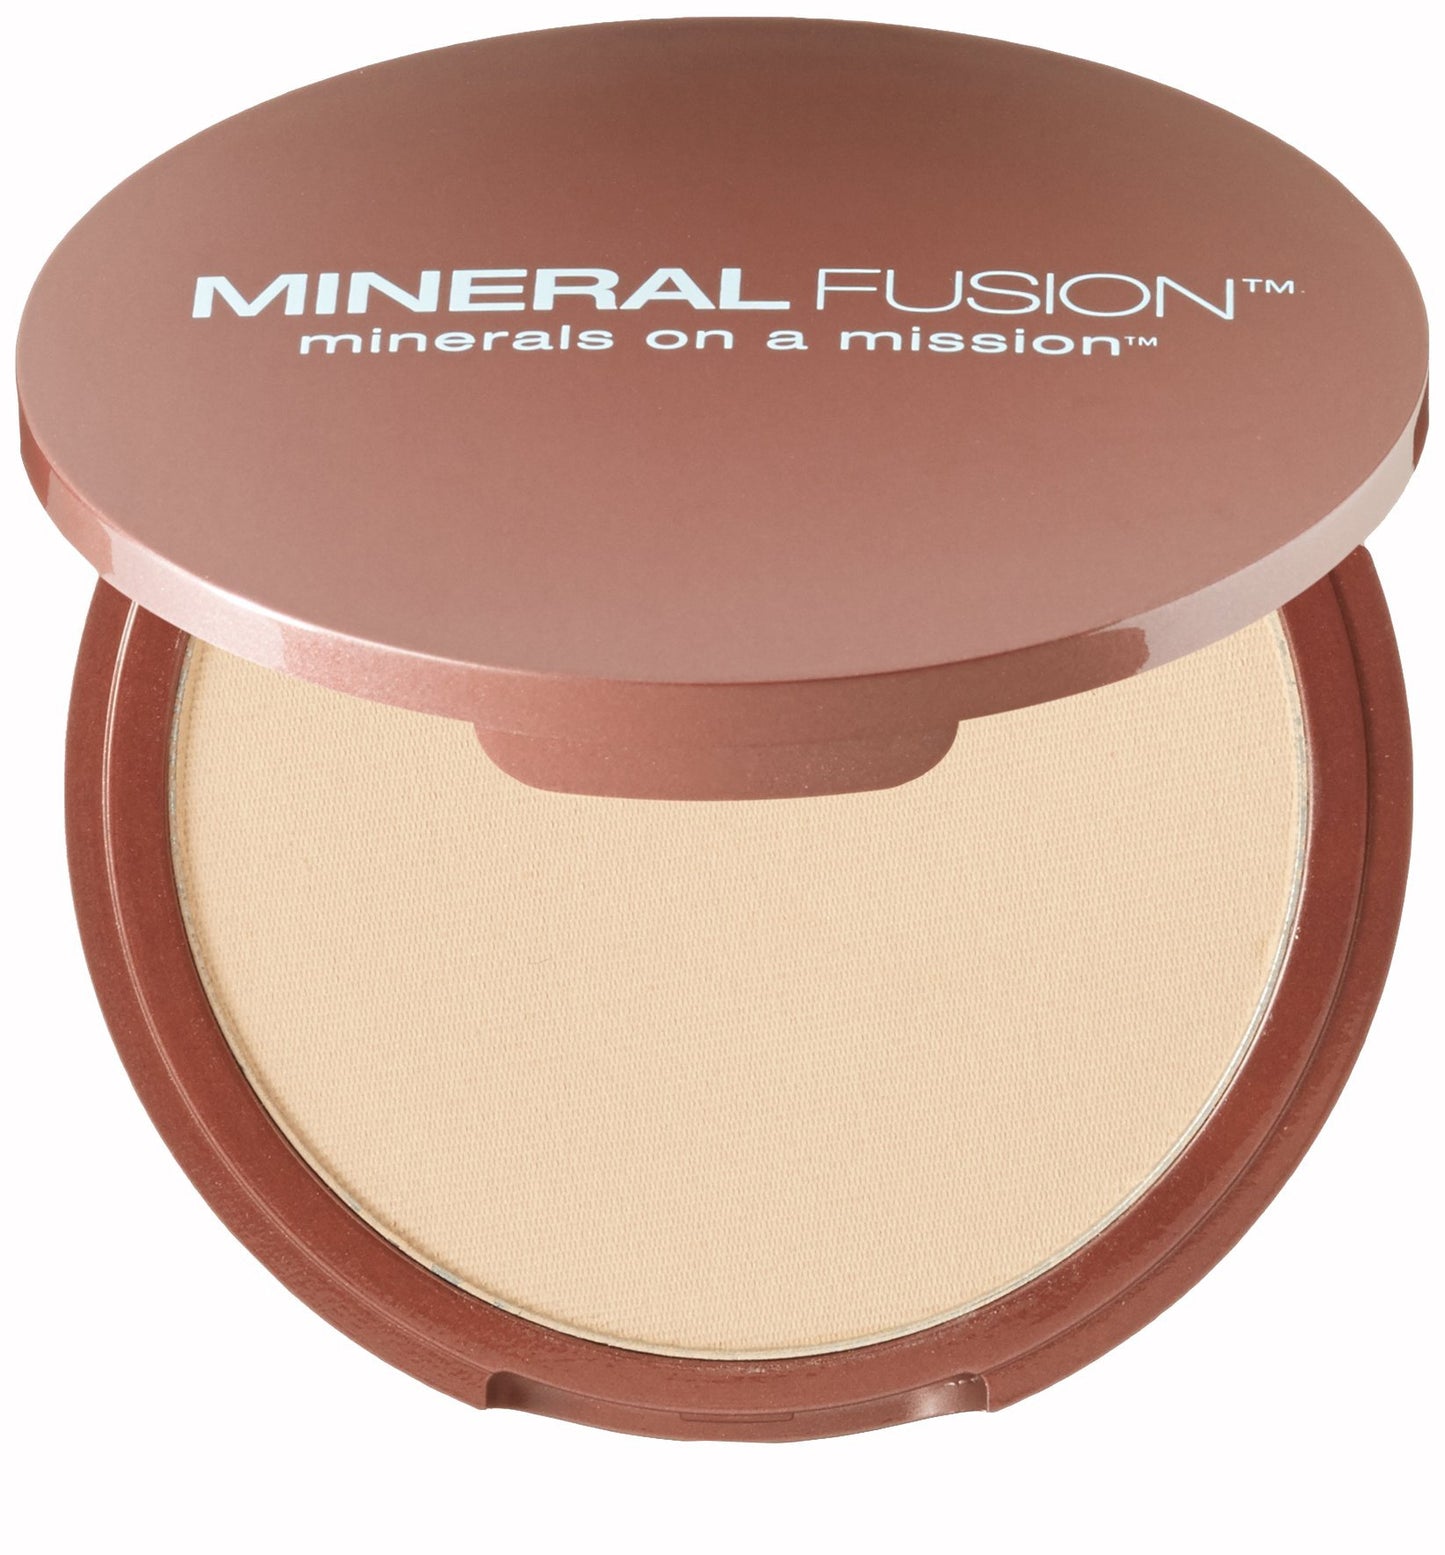 Mineral Fusion Pressed Makeup Powder Foundation, Warm, 0.32 Ounce